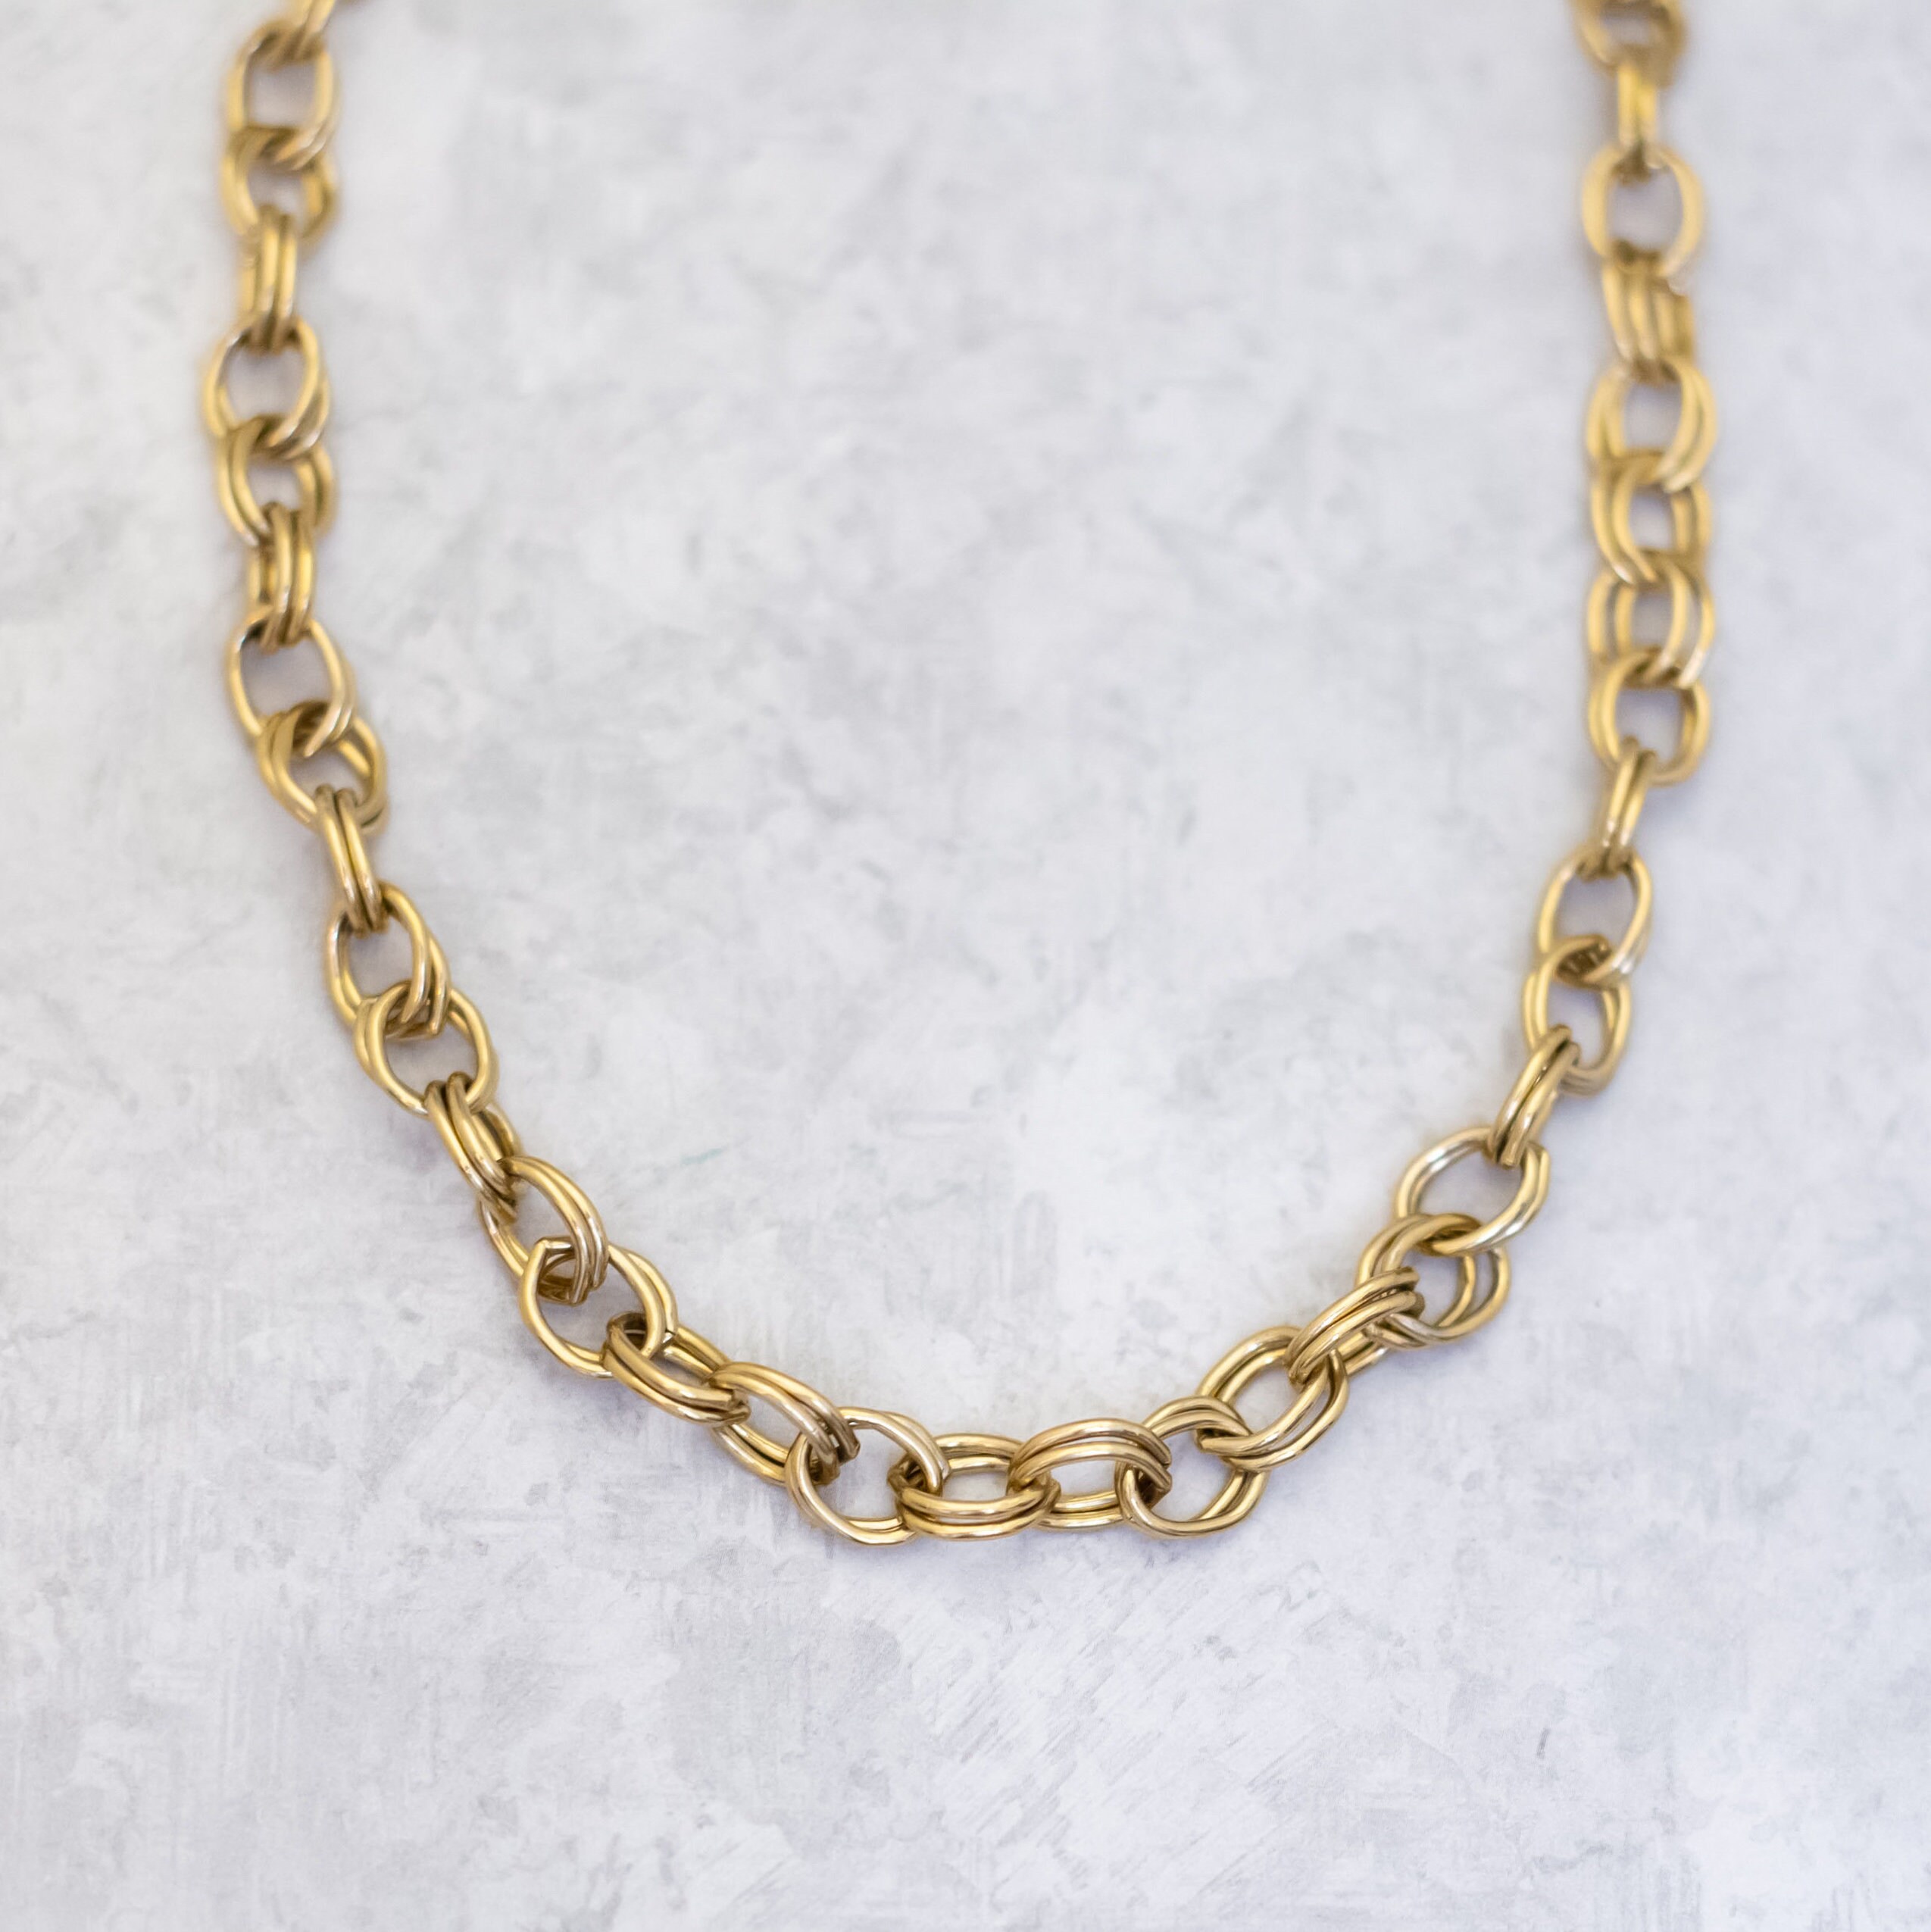 Gold Filled Chain - 16 inch 14/20 GF Necklace - 1.2 mm Curb Neck Chain with Spring Ring - Bright Finish Brand New Wholesale Jewelry Supply